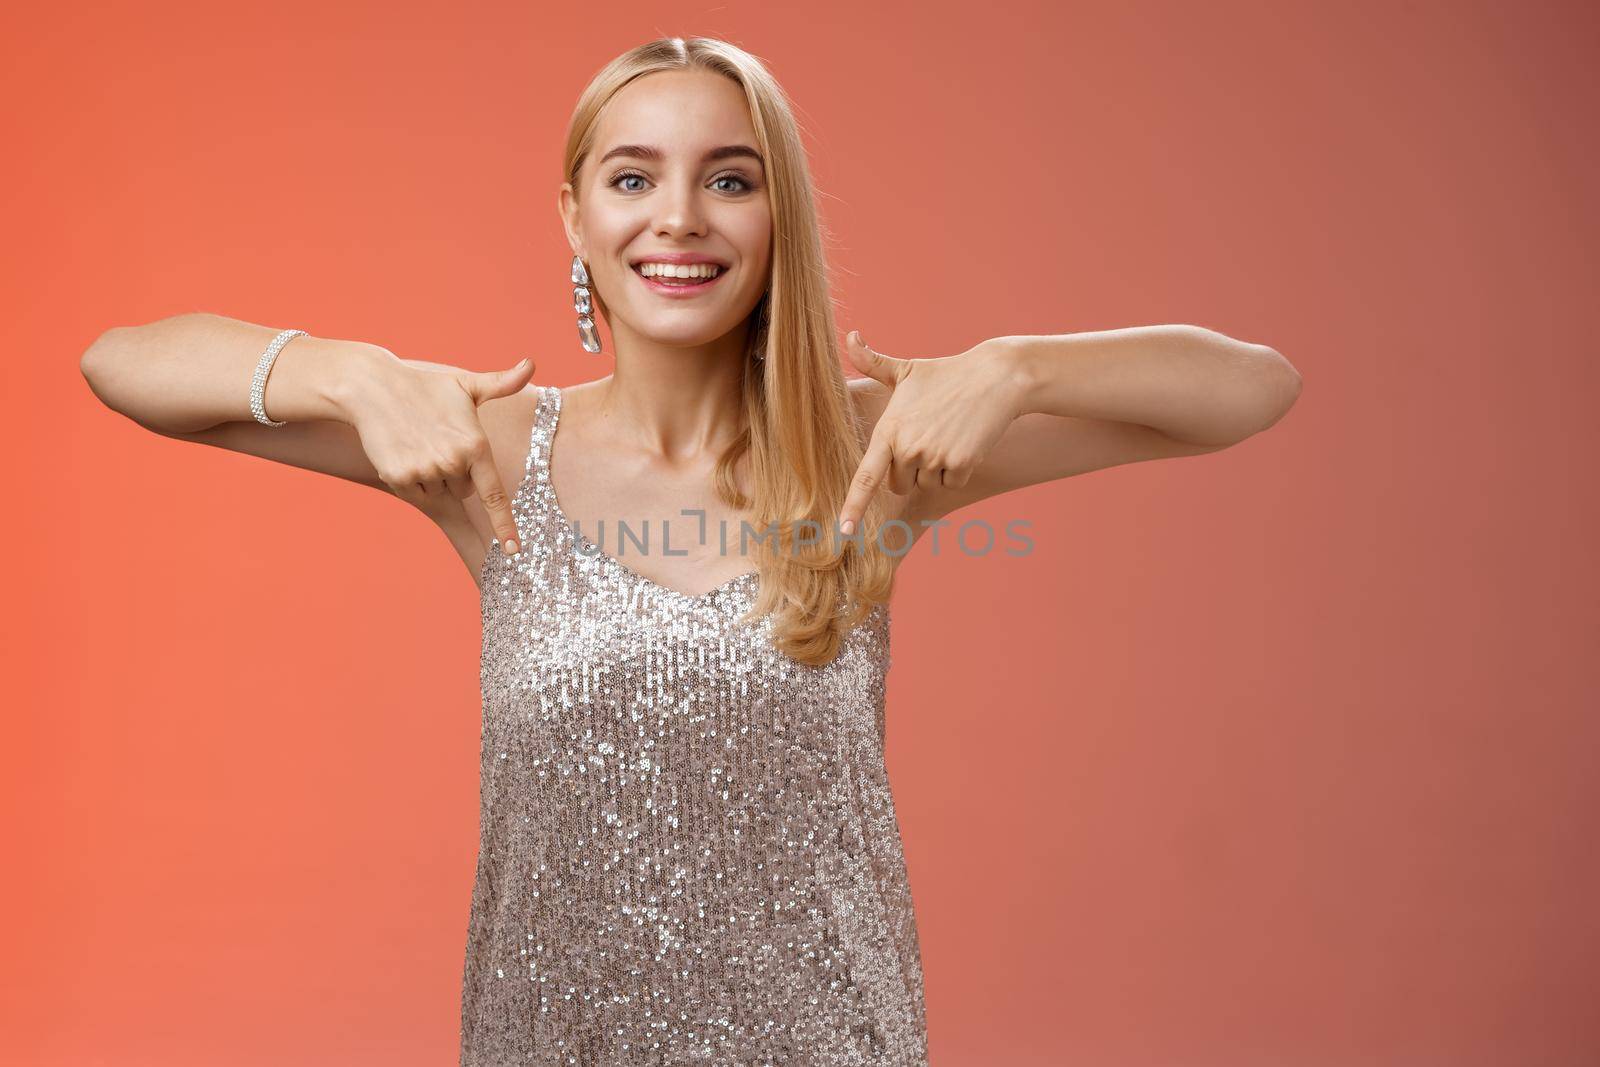 Attractive glamour blond woman in silver glittering dress pointing down smiling excited showing awesome party place hang-out inviting try-out standing pleased red background enjoying perfect evening.